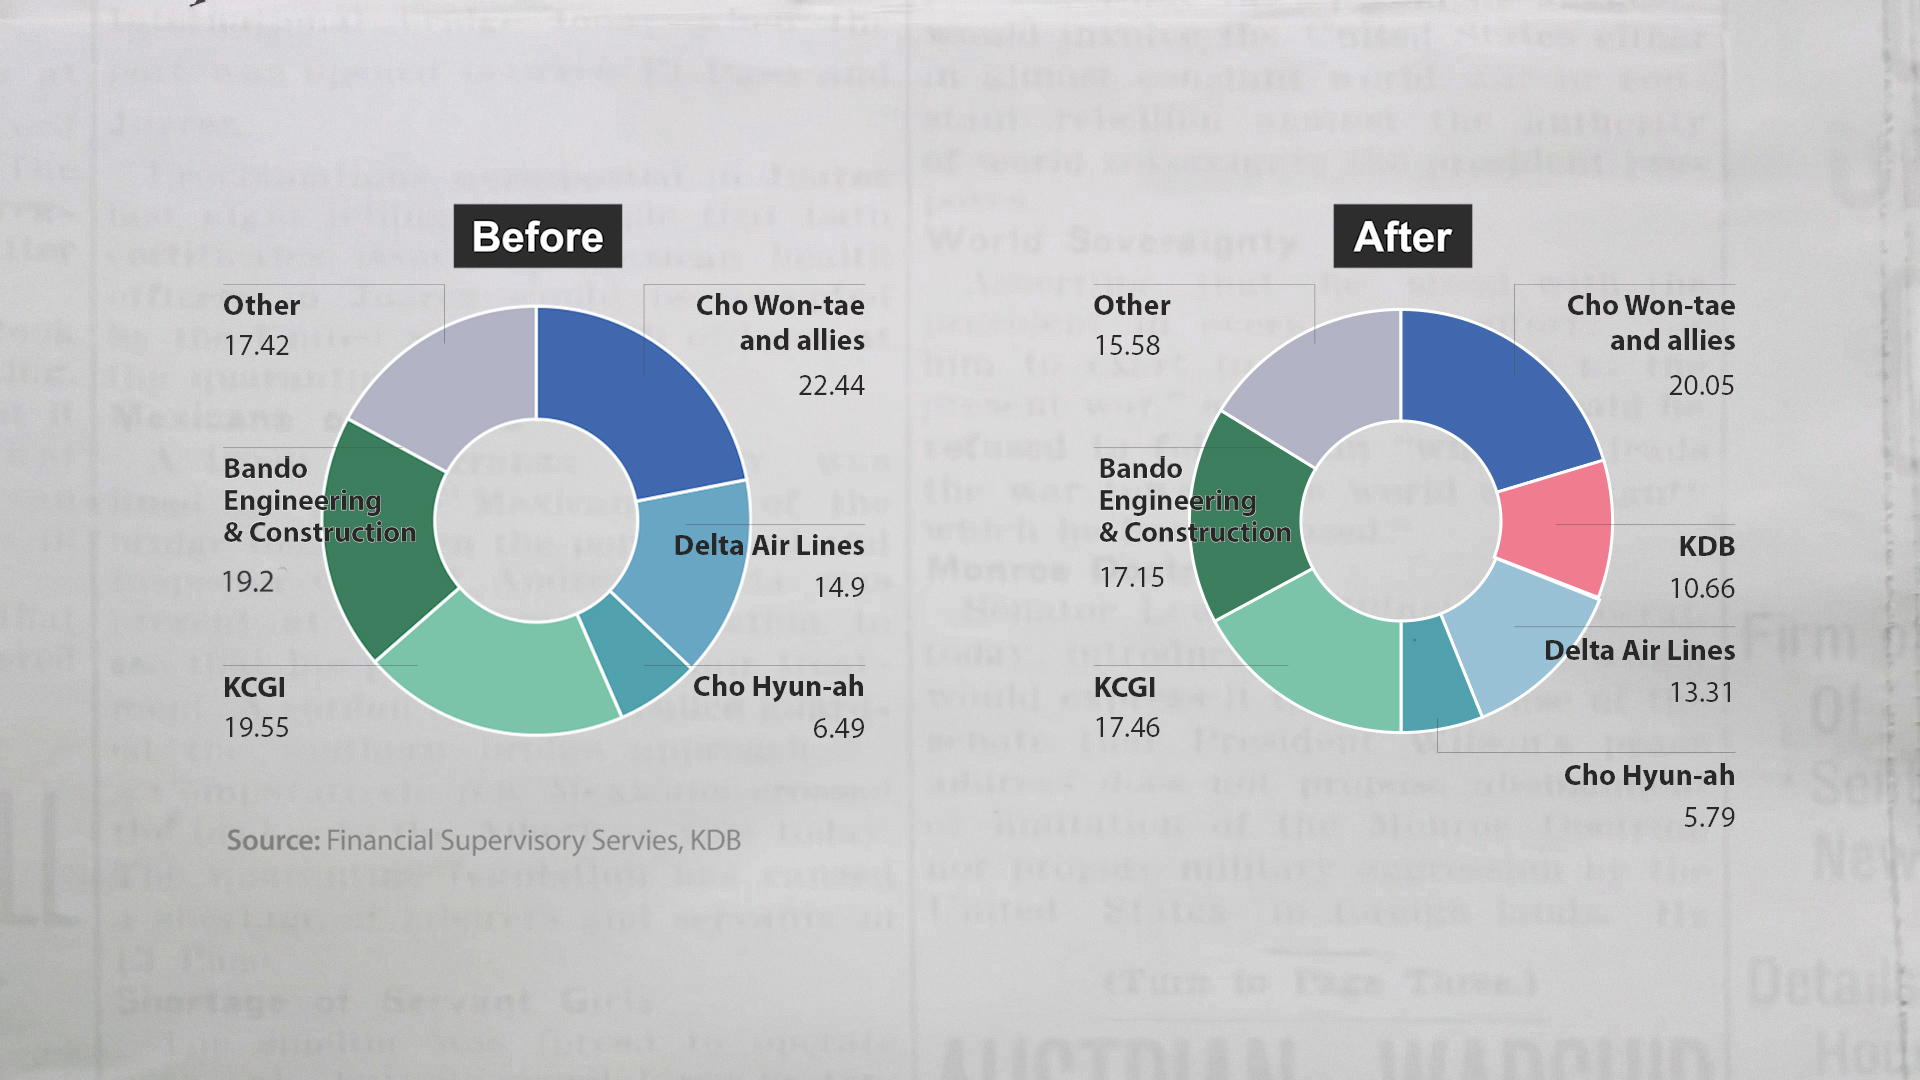 Hanjin KAL shareholdings before and after KDB financing